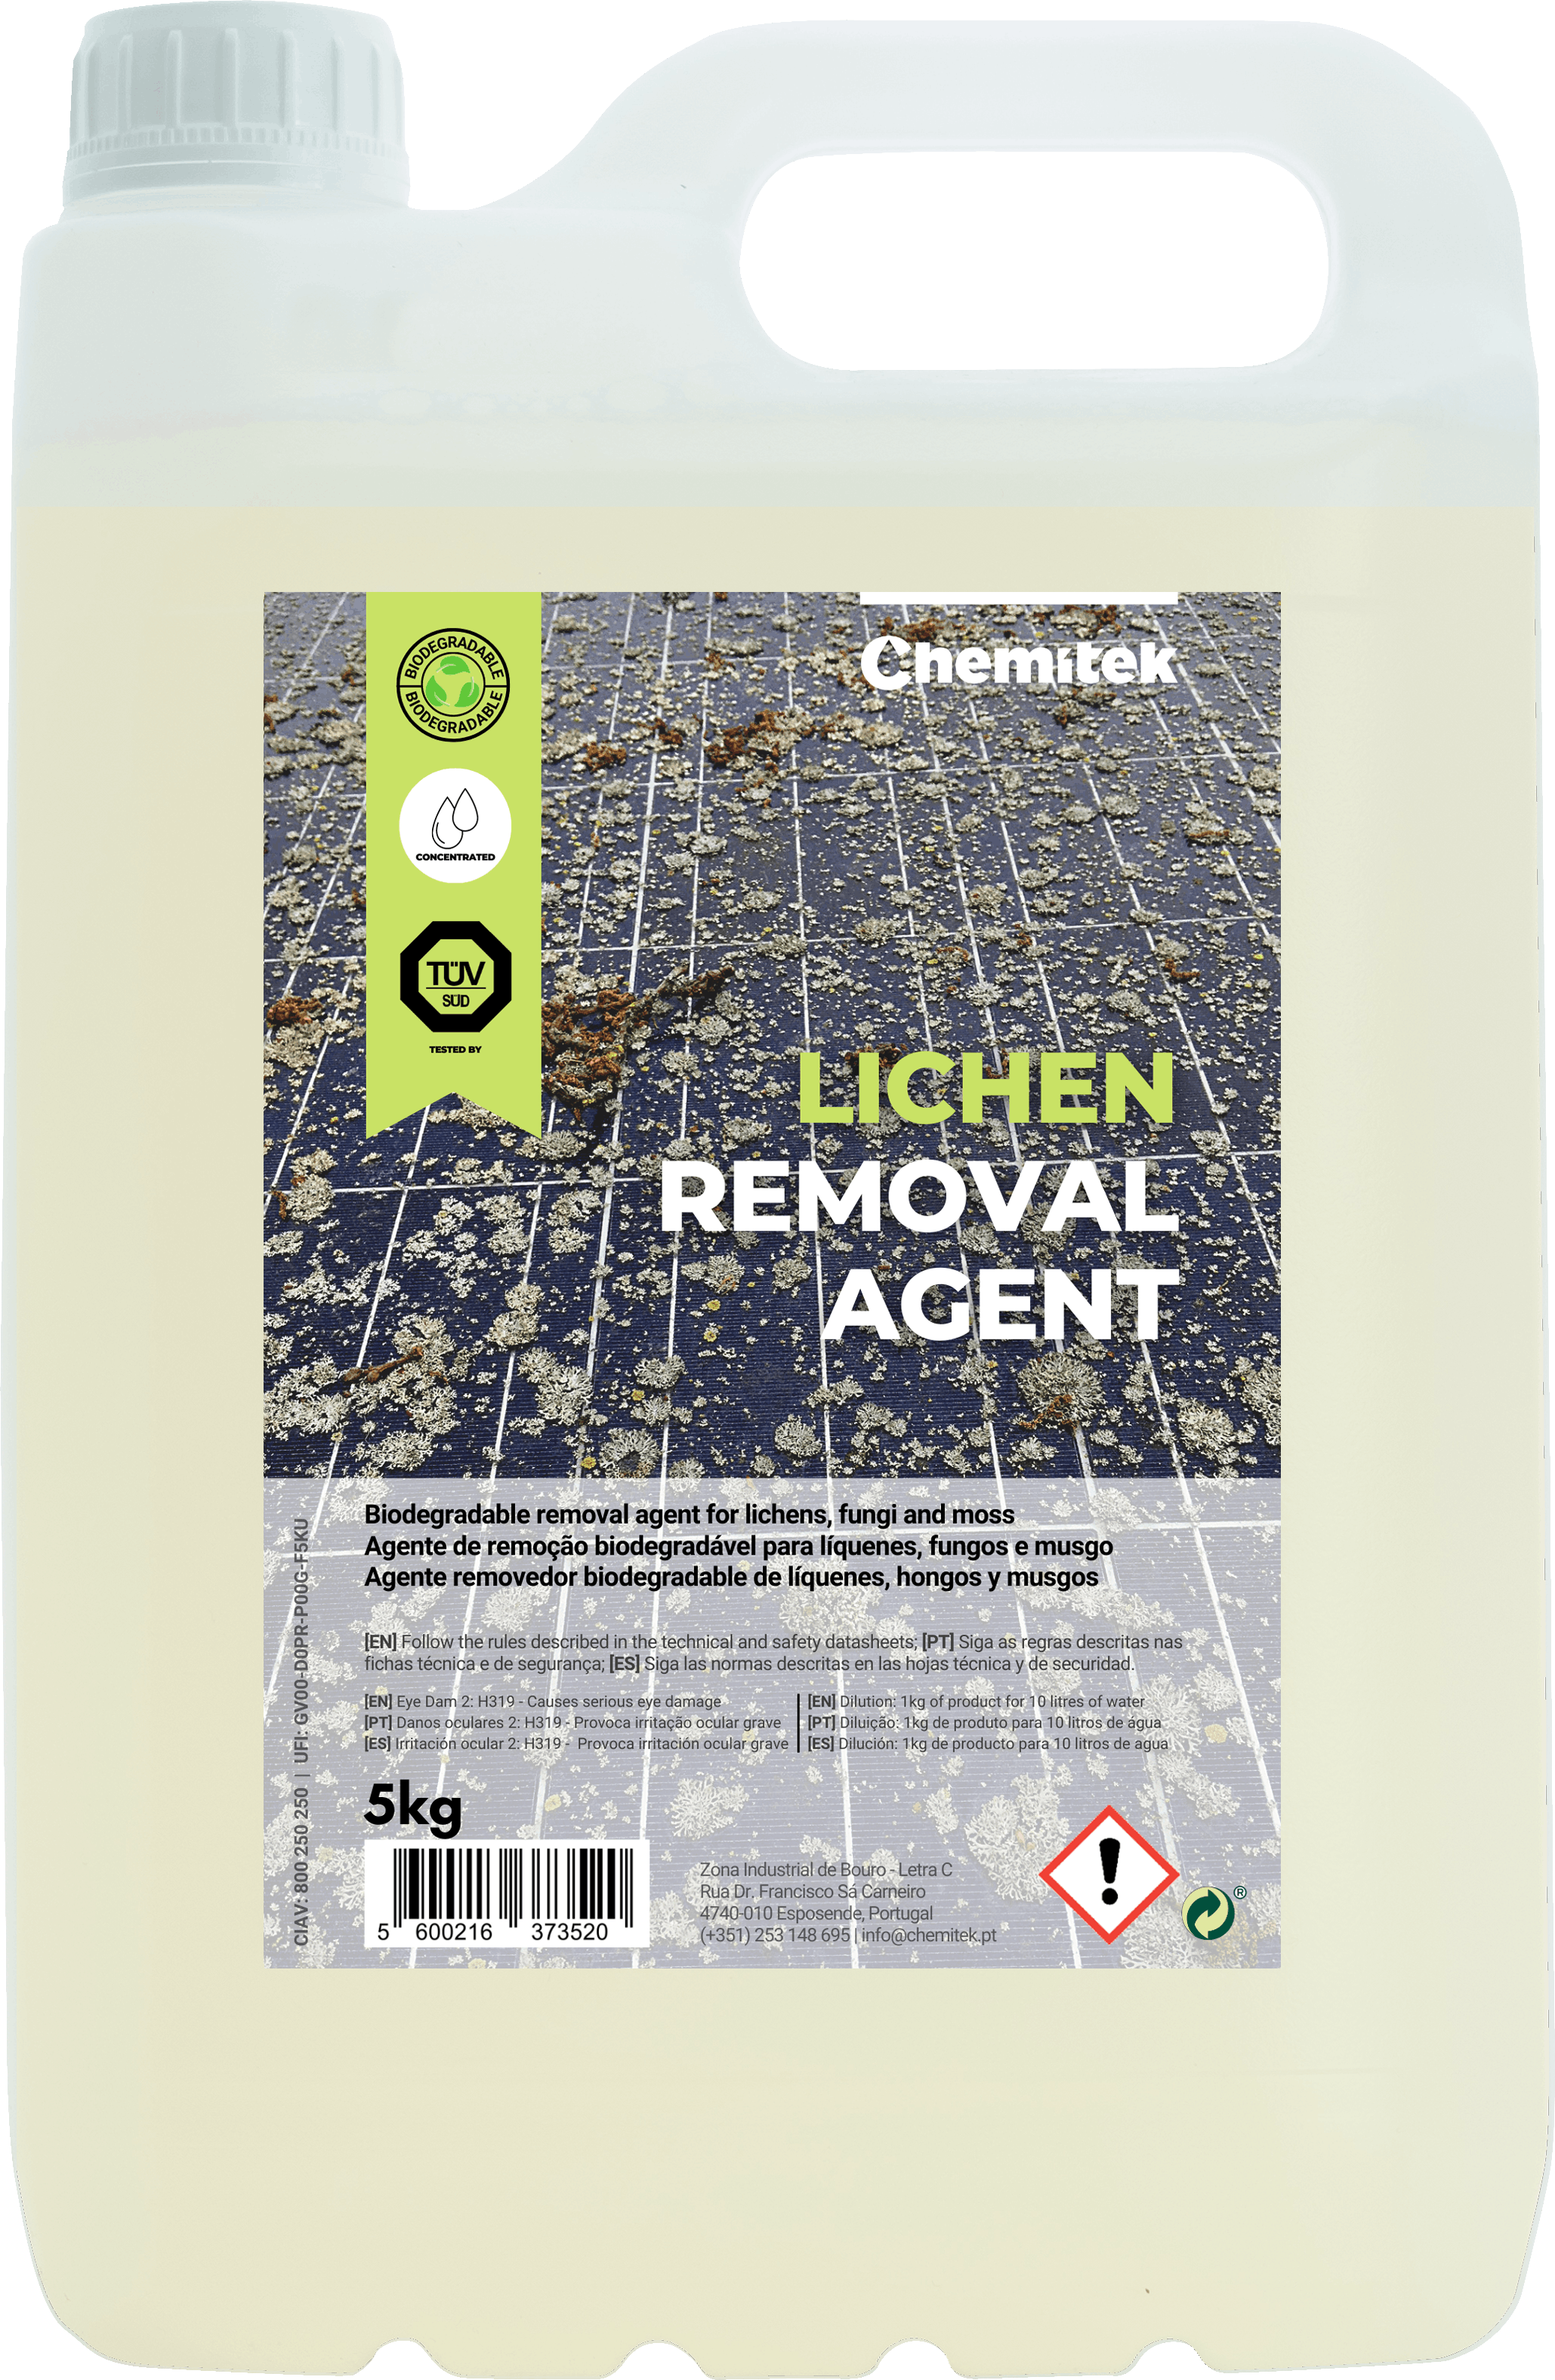 Product - Lichen Removal Agent